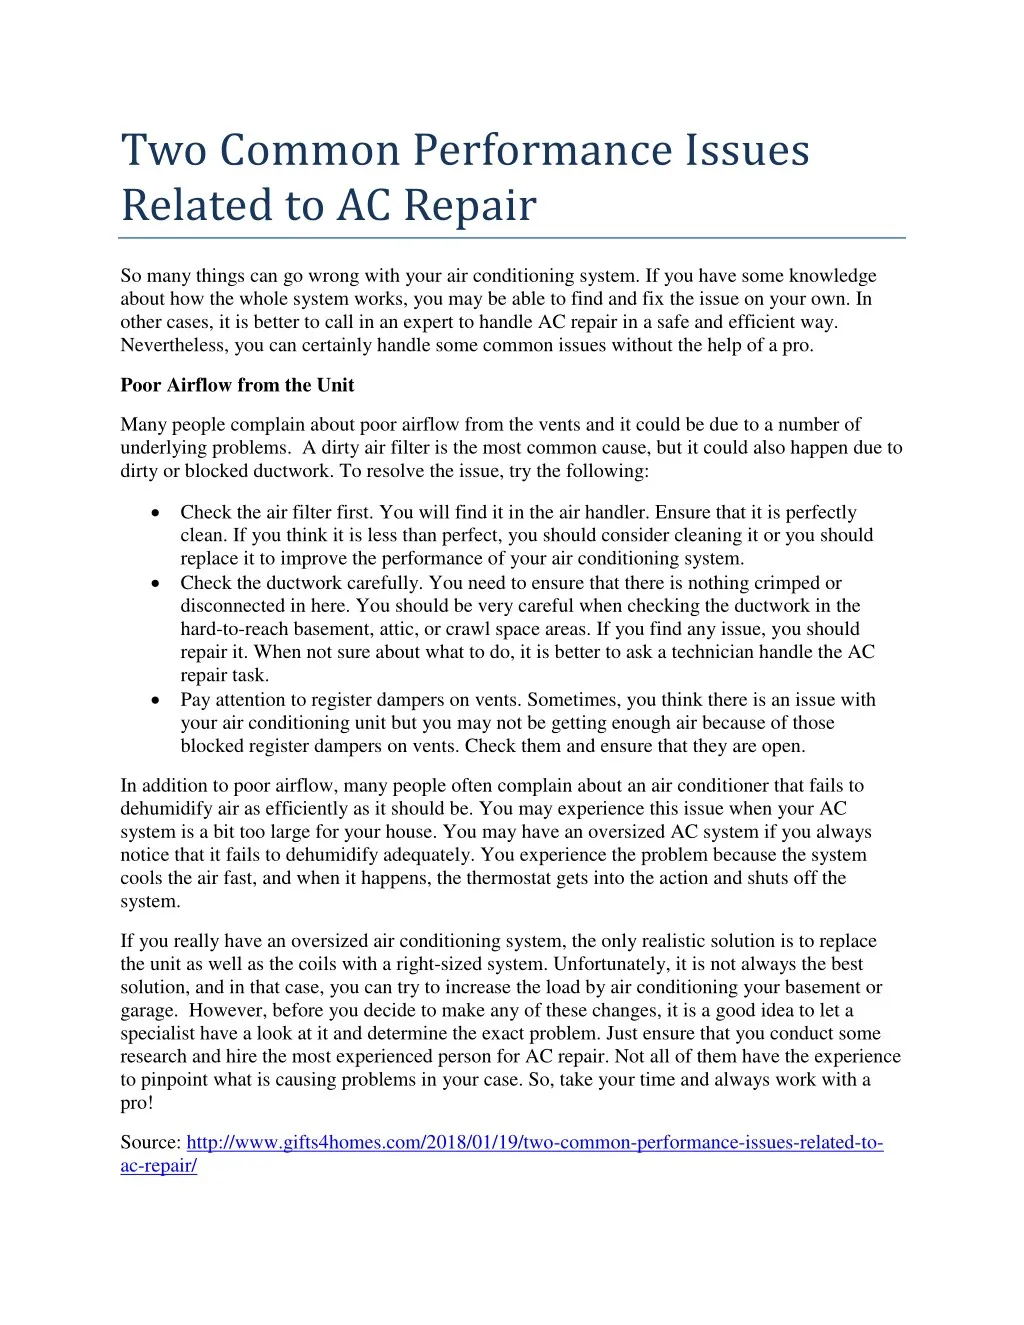 two common performance issues related to ac repair